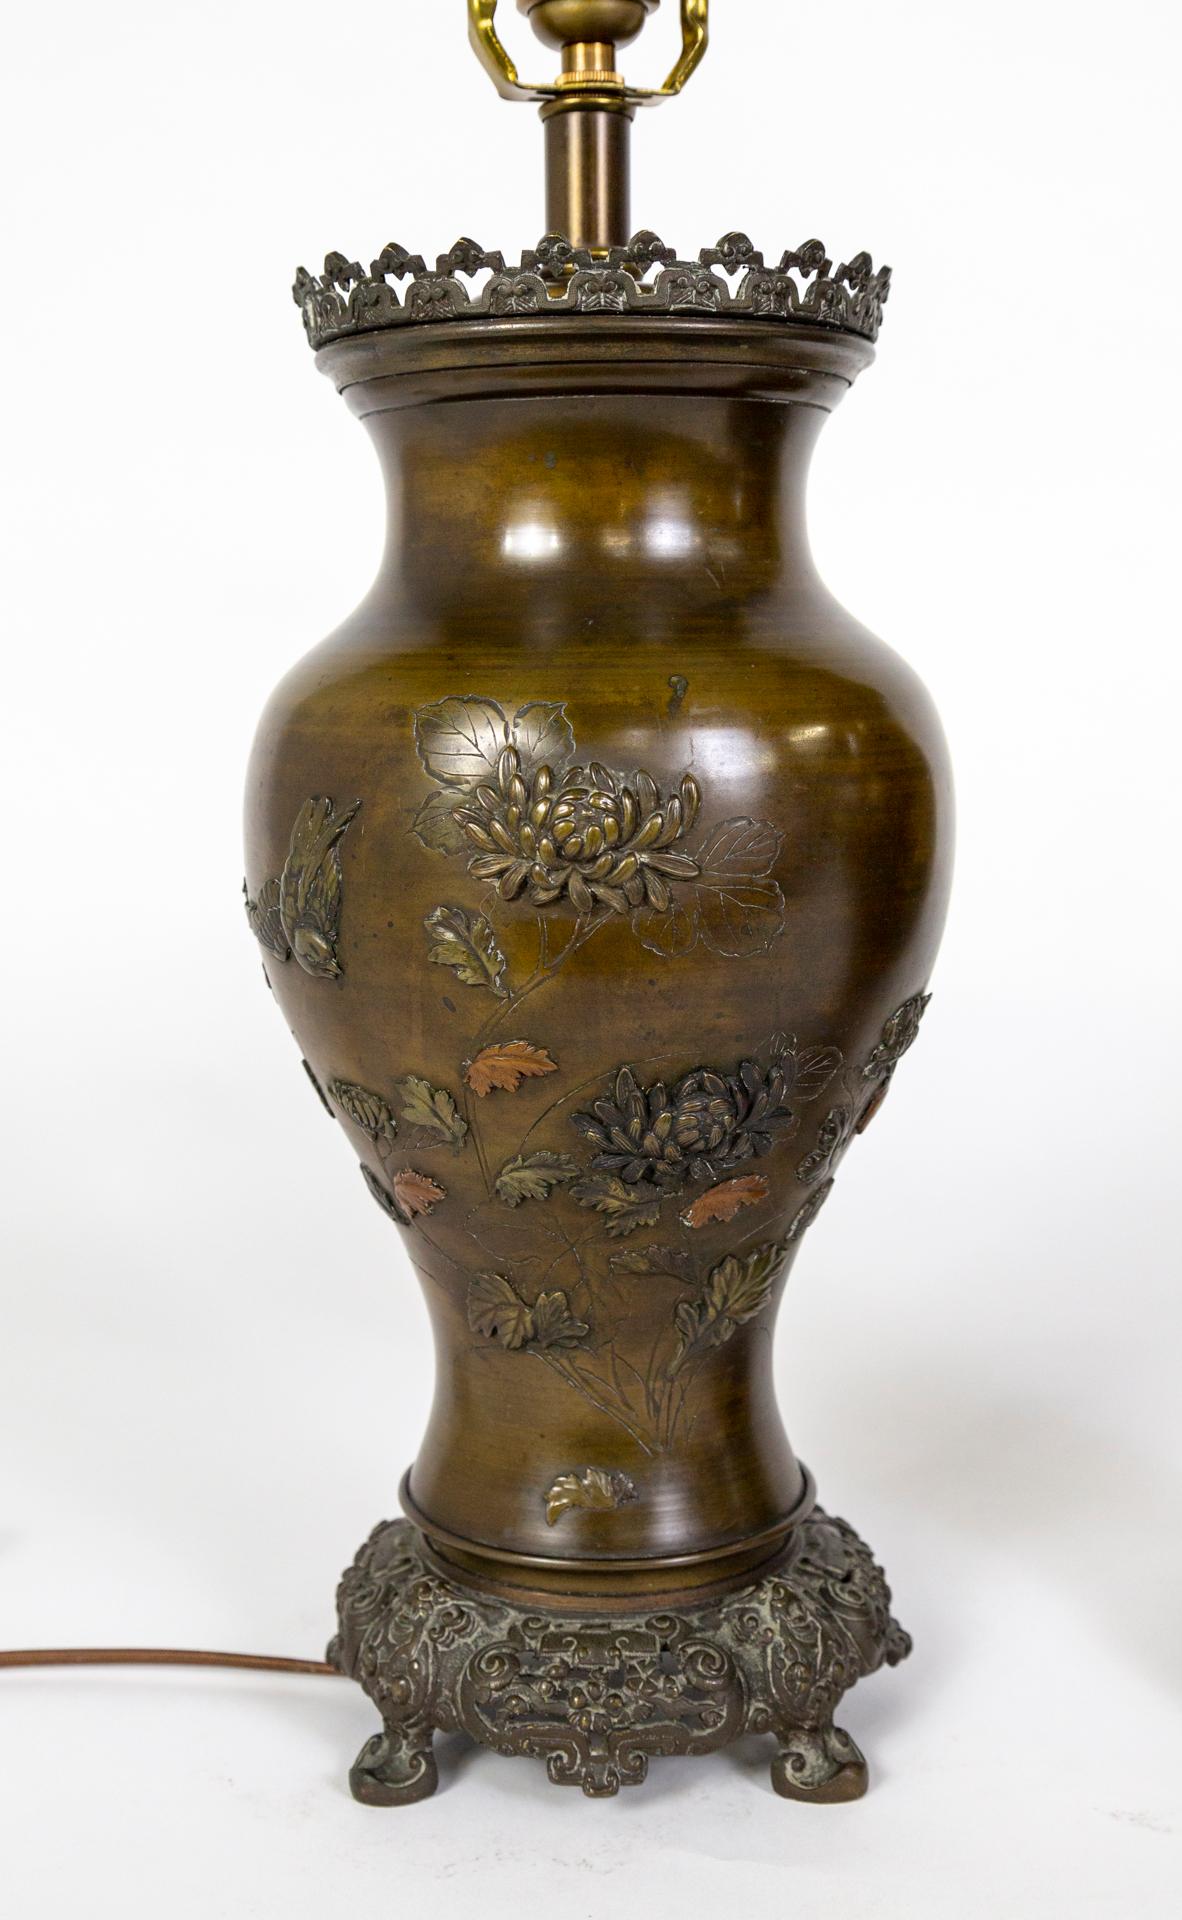 A pair of large, cast bronze, urn-shaped lamps made circa 1885-1890, during the Meiji period (1868-1912) in Japan. They are decorated in both relief and applique with chrysanthemums, birds, leaves, and carved branches. Some of the applied details